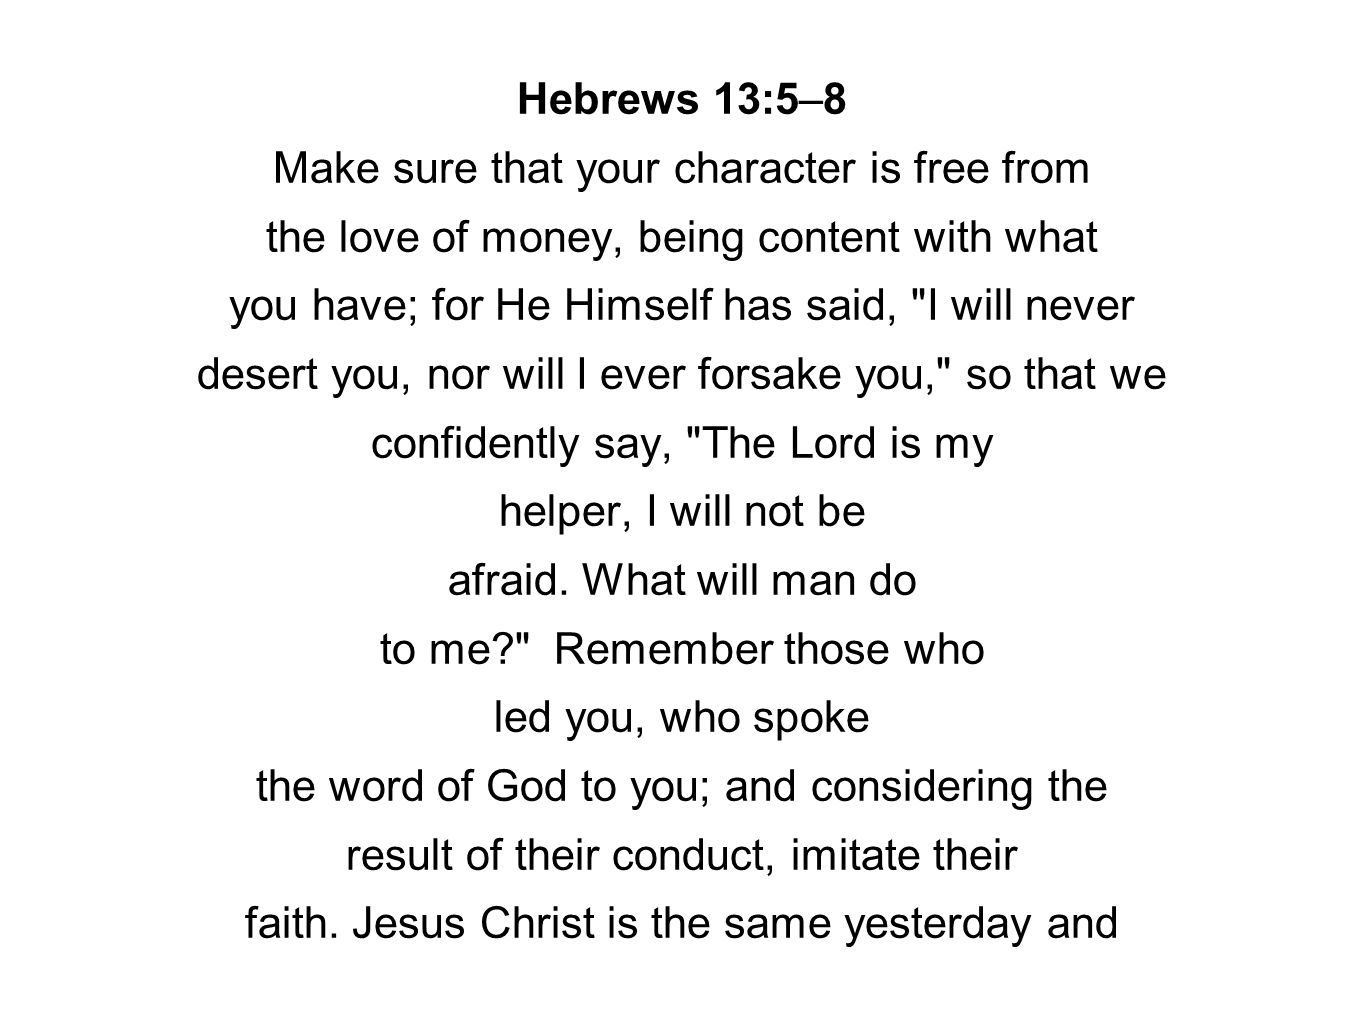 Hebrews 13:5–8 Make sure that your character is free from the love of money, being content with what you have; for He Himself has said, I will never desert you, nor will I ever forsake you, so that we confidently say, The Lord is my helper, I will not be afraid.